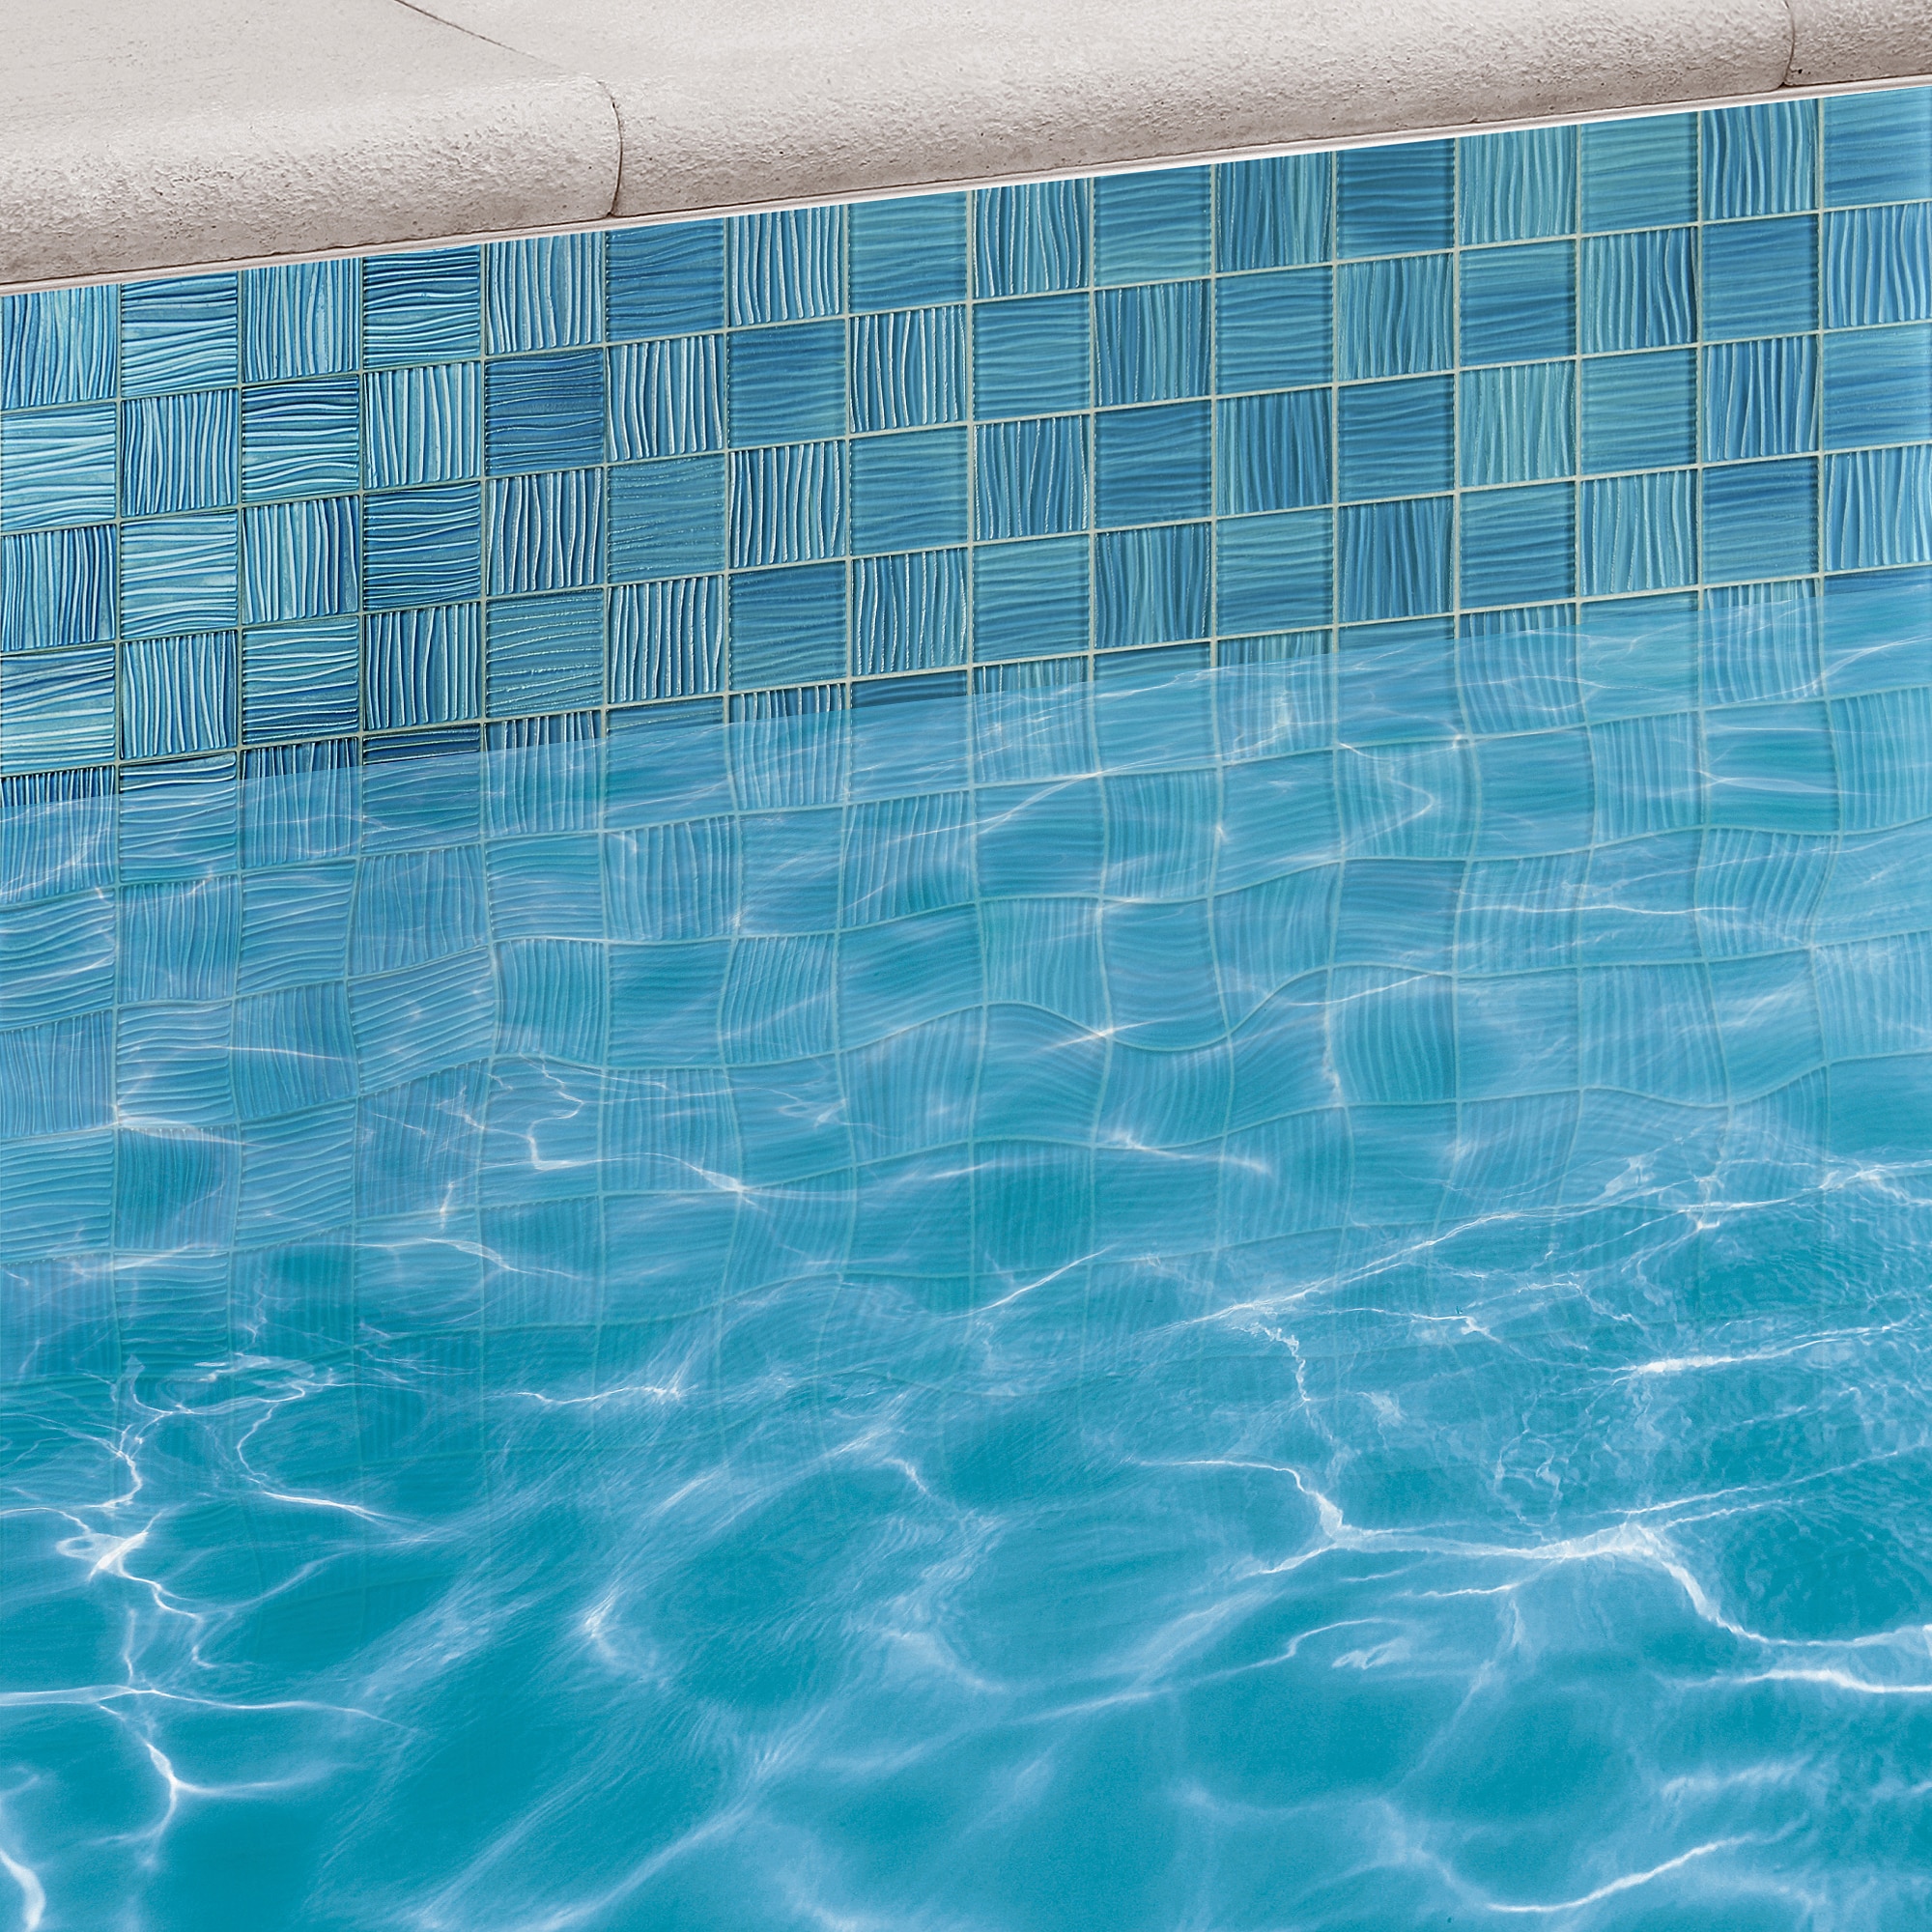 Artmore Tile Mineralis Aqua 12-in x 12-in Polished Glass Checkered ...